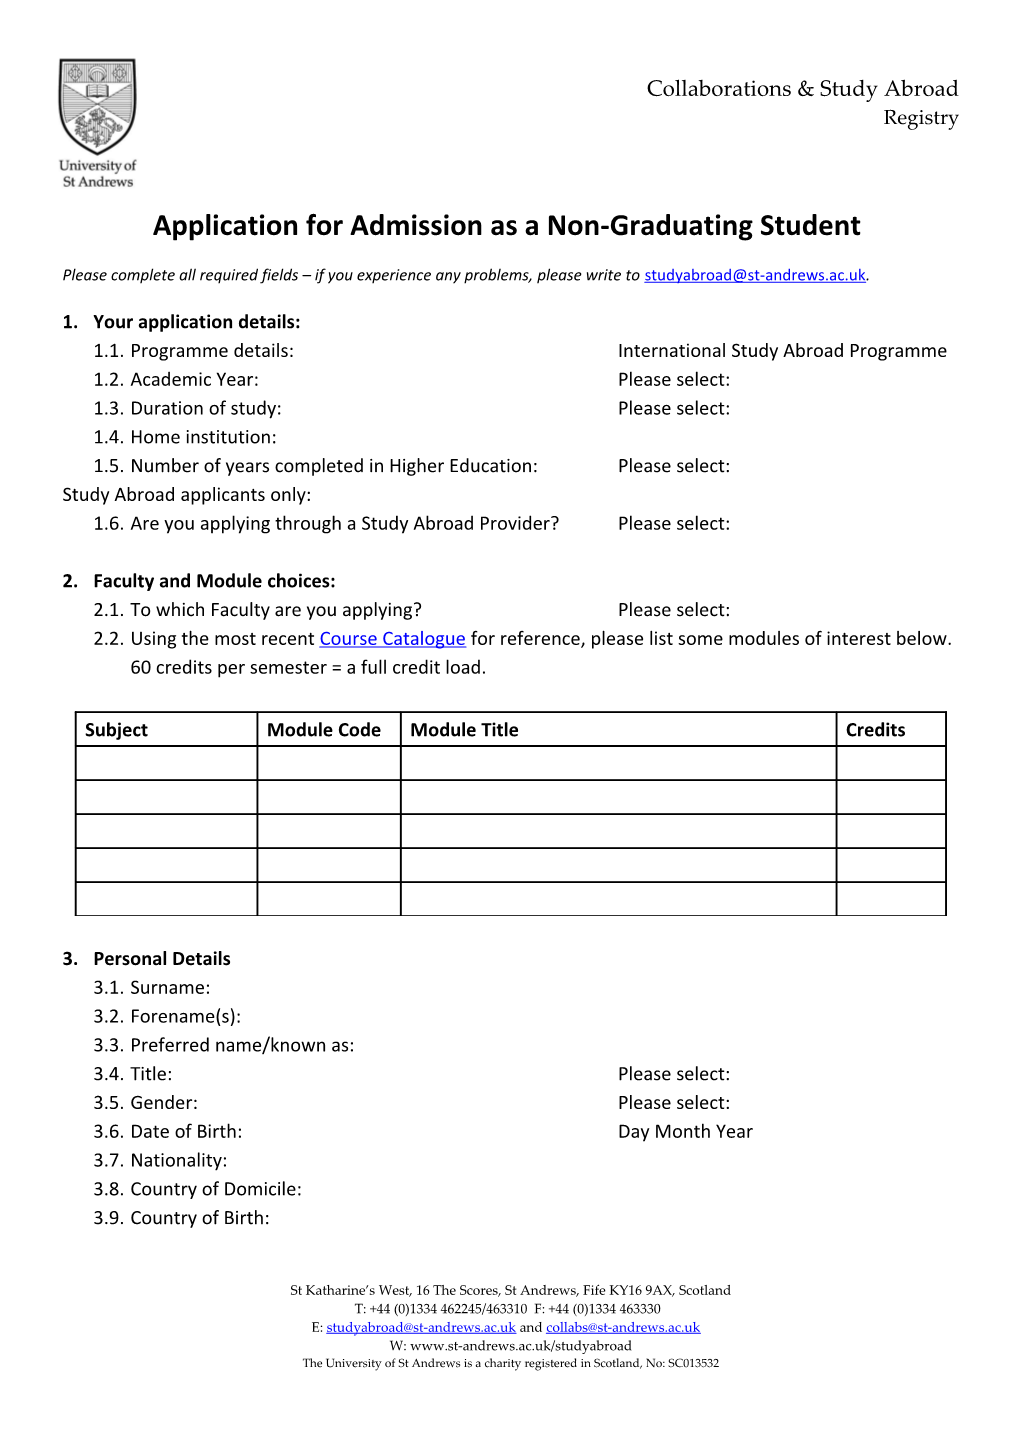 Application for Admission As a Non-Graduating Student